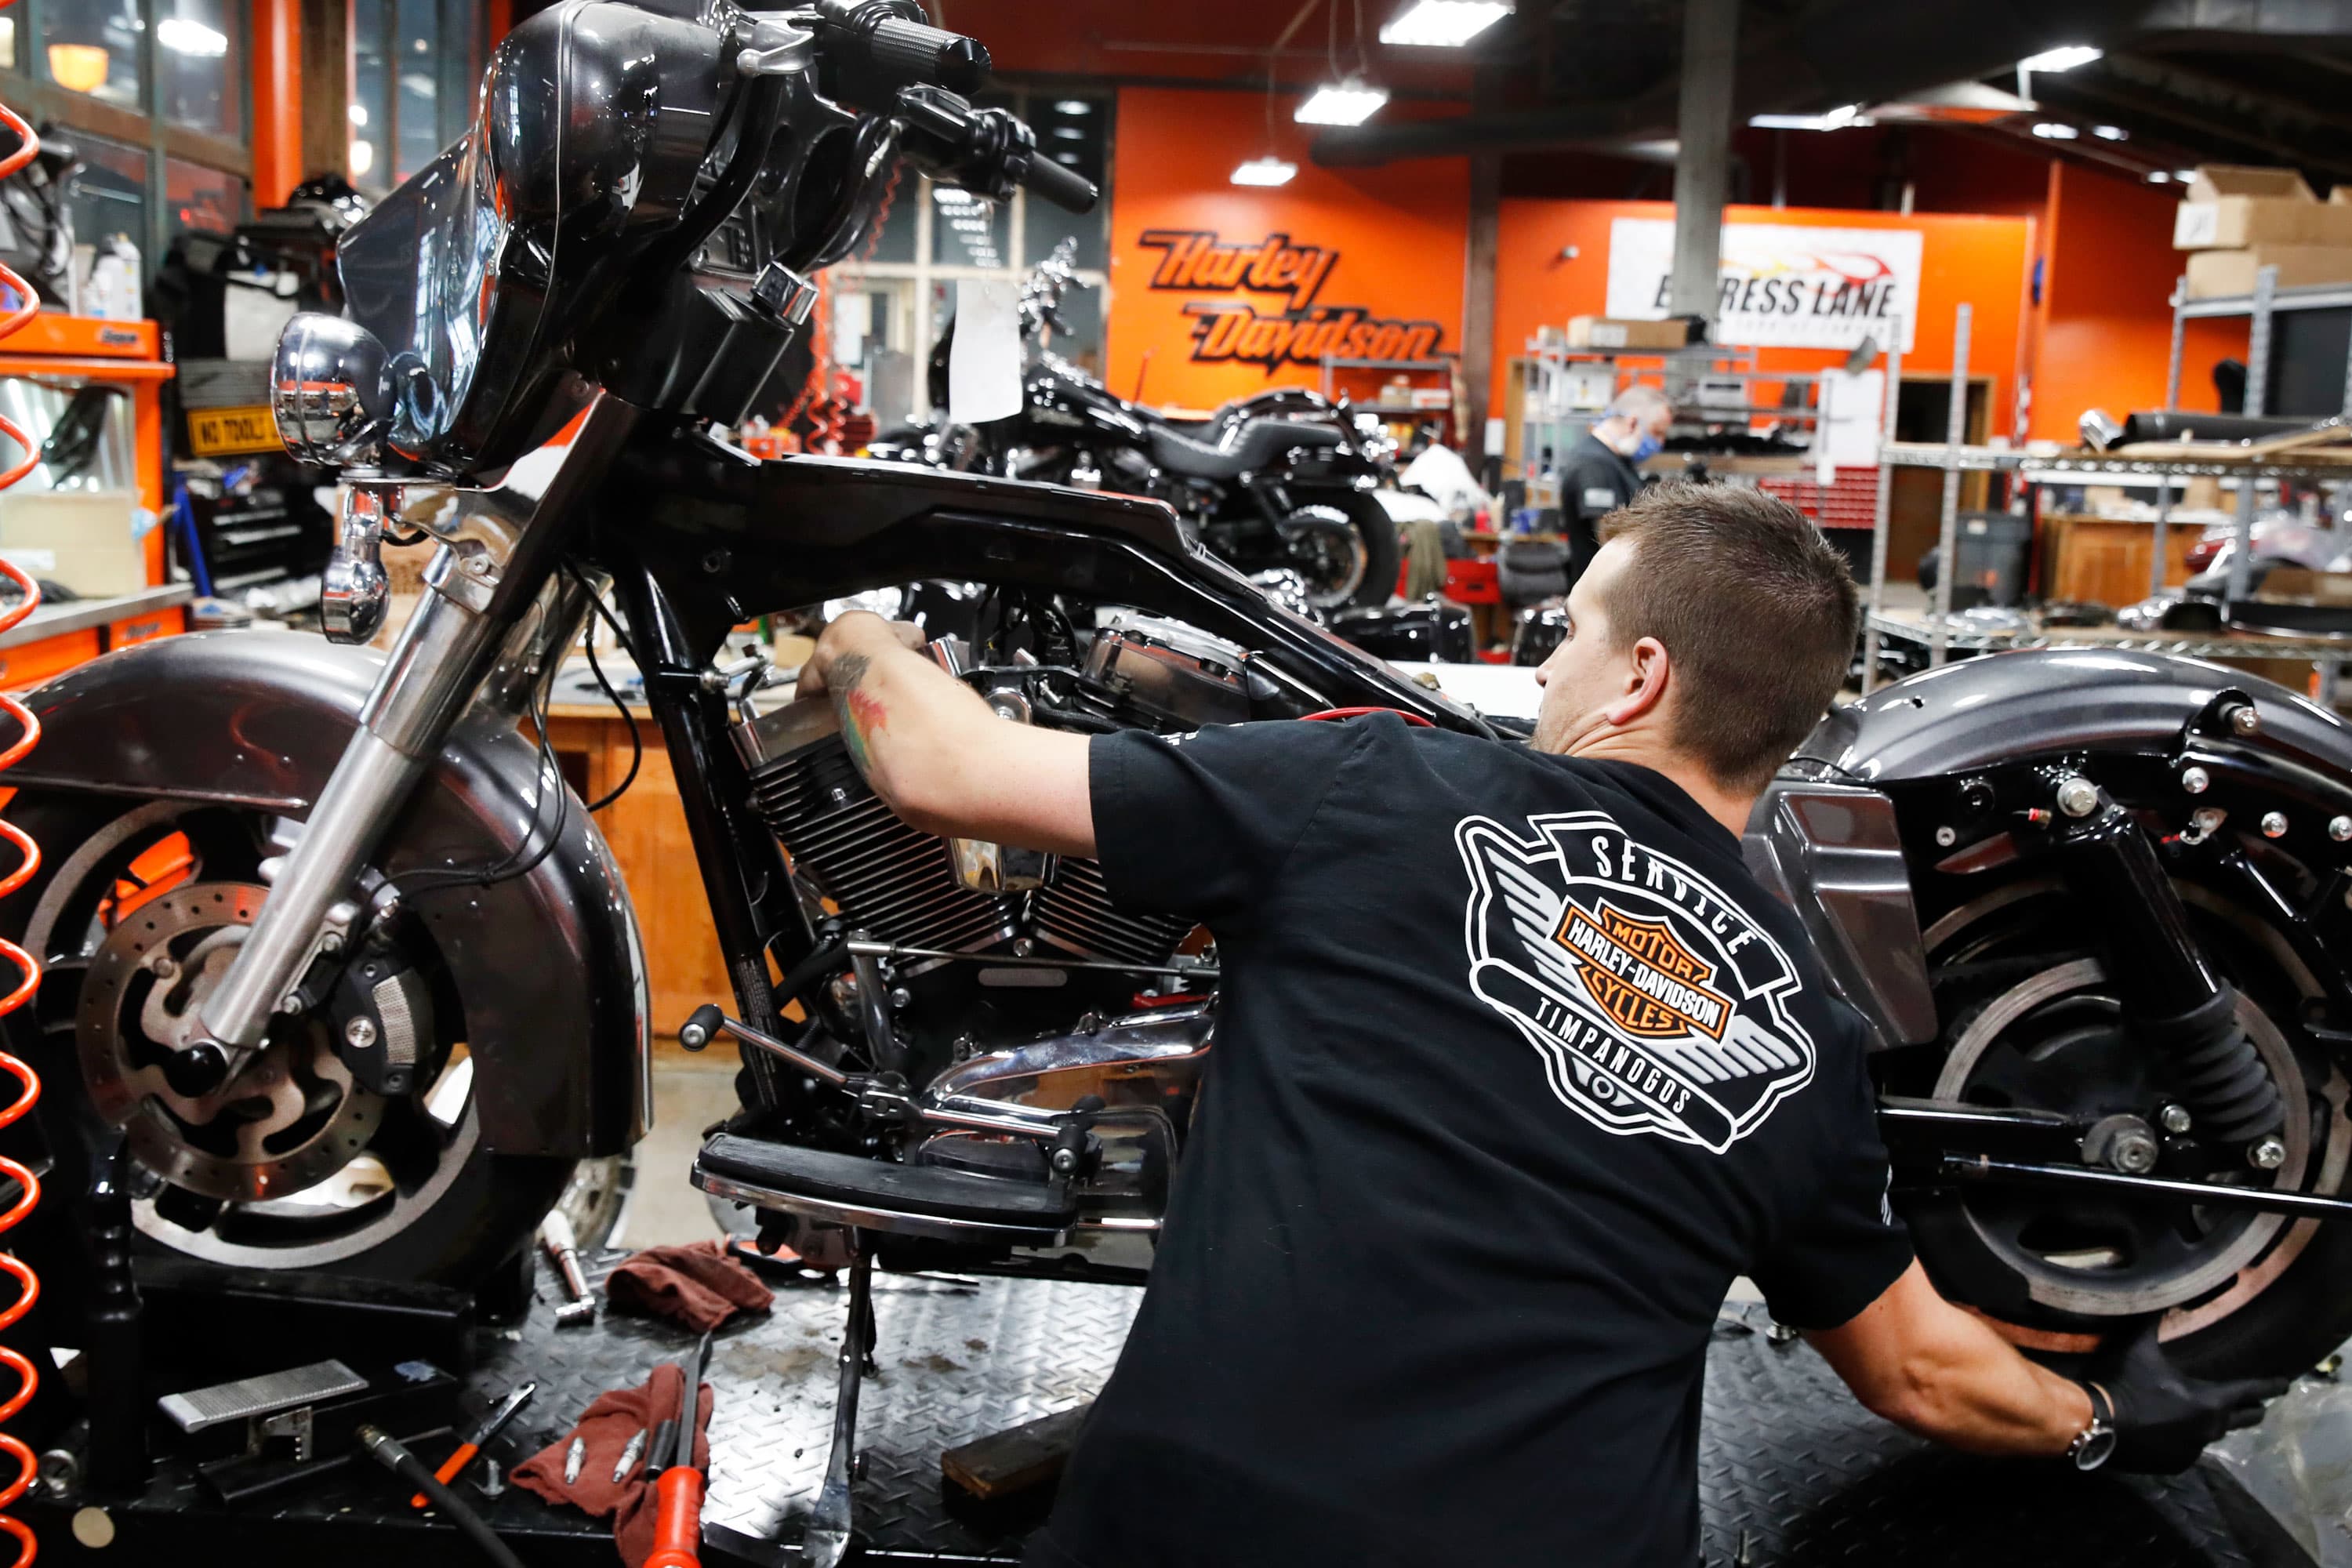 Harley-Davidson’s turnaround is far from certain and the stock could fall 20%, Morgan Stanley says